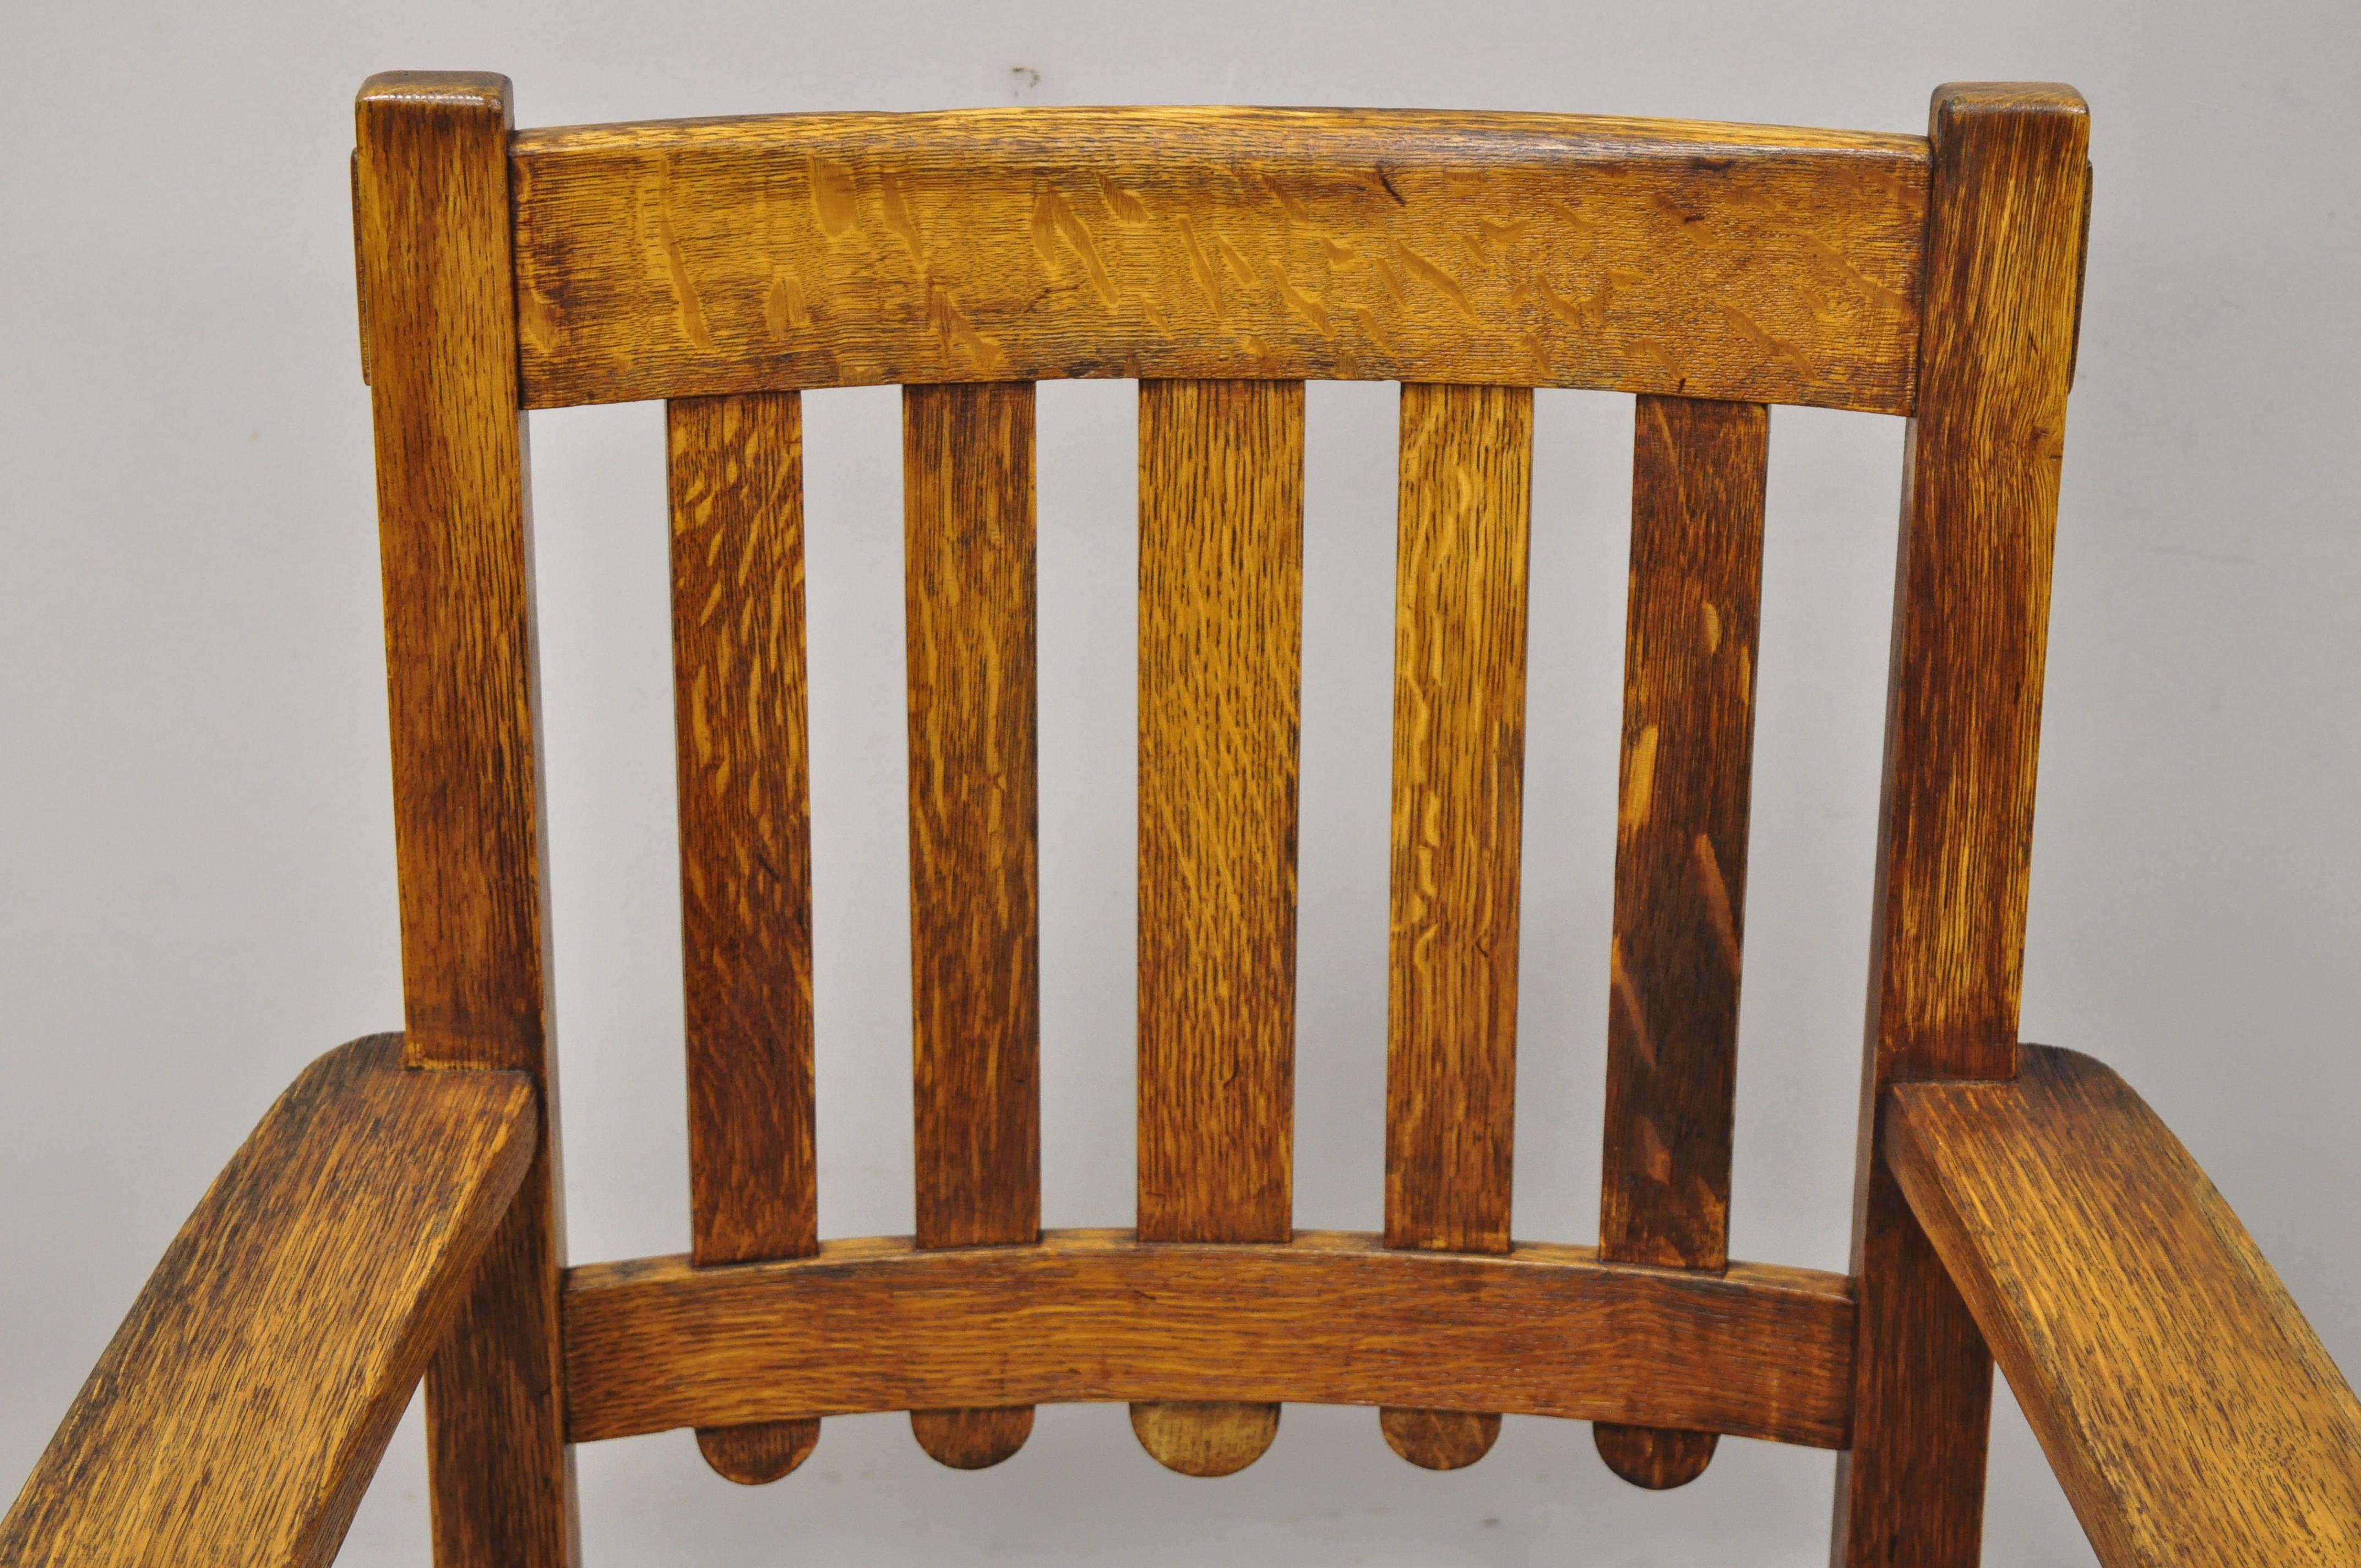 quaint furniture stickley brothers rocking chair